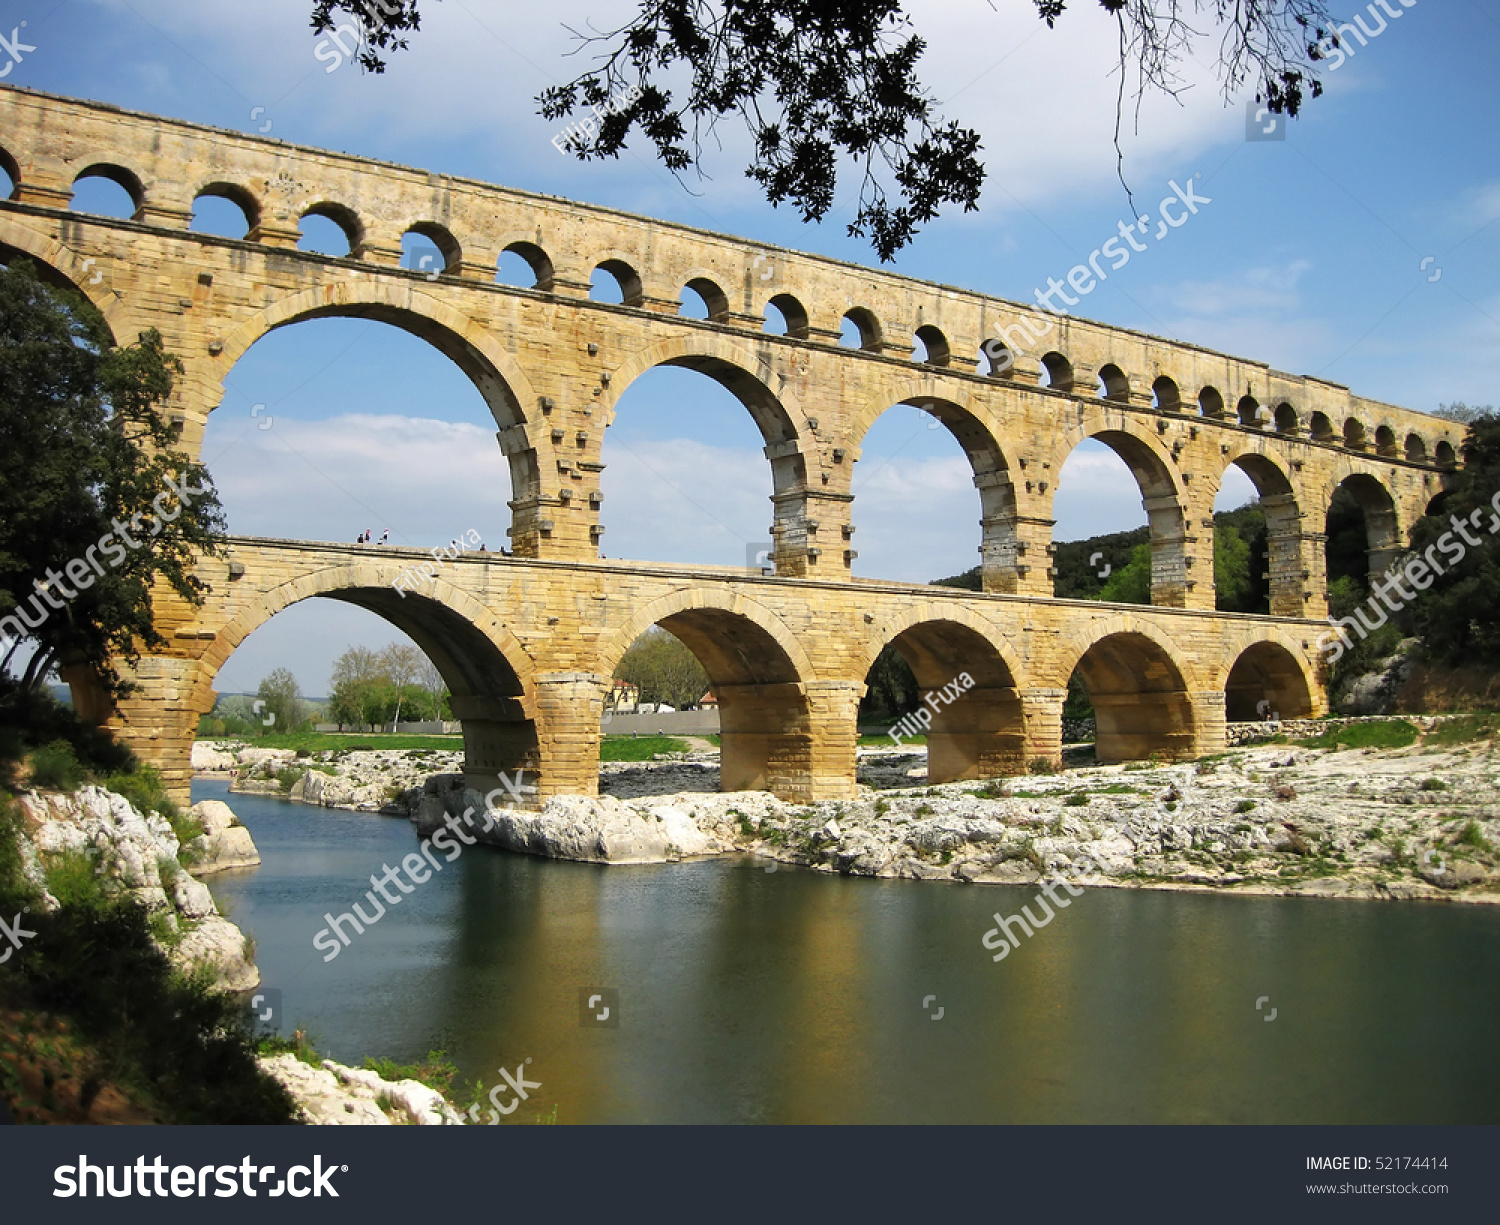 How Old Is The Aqueduct At Nimes 110